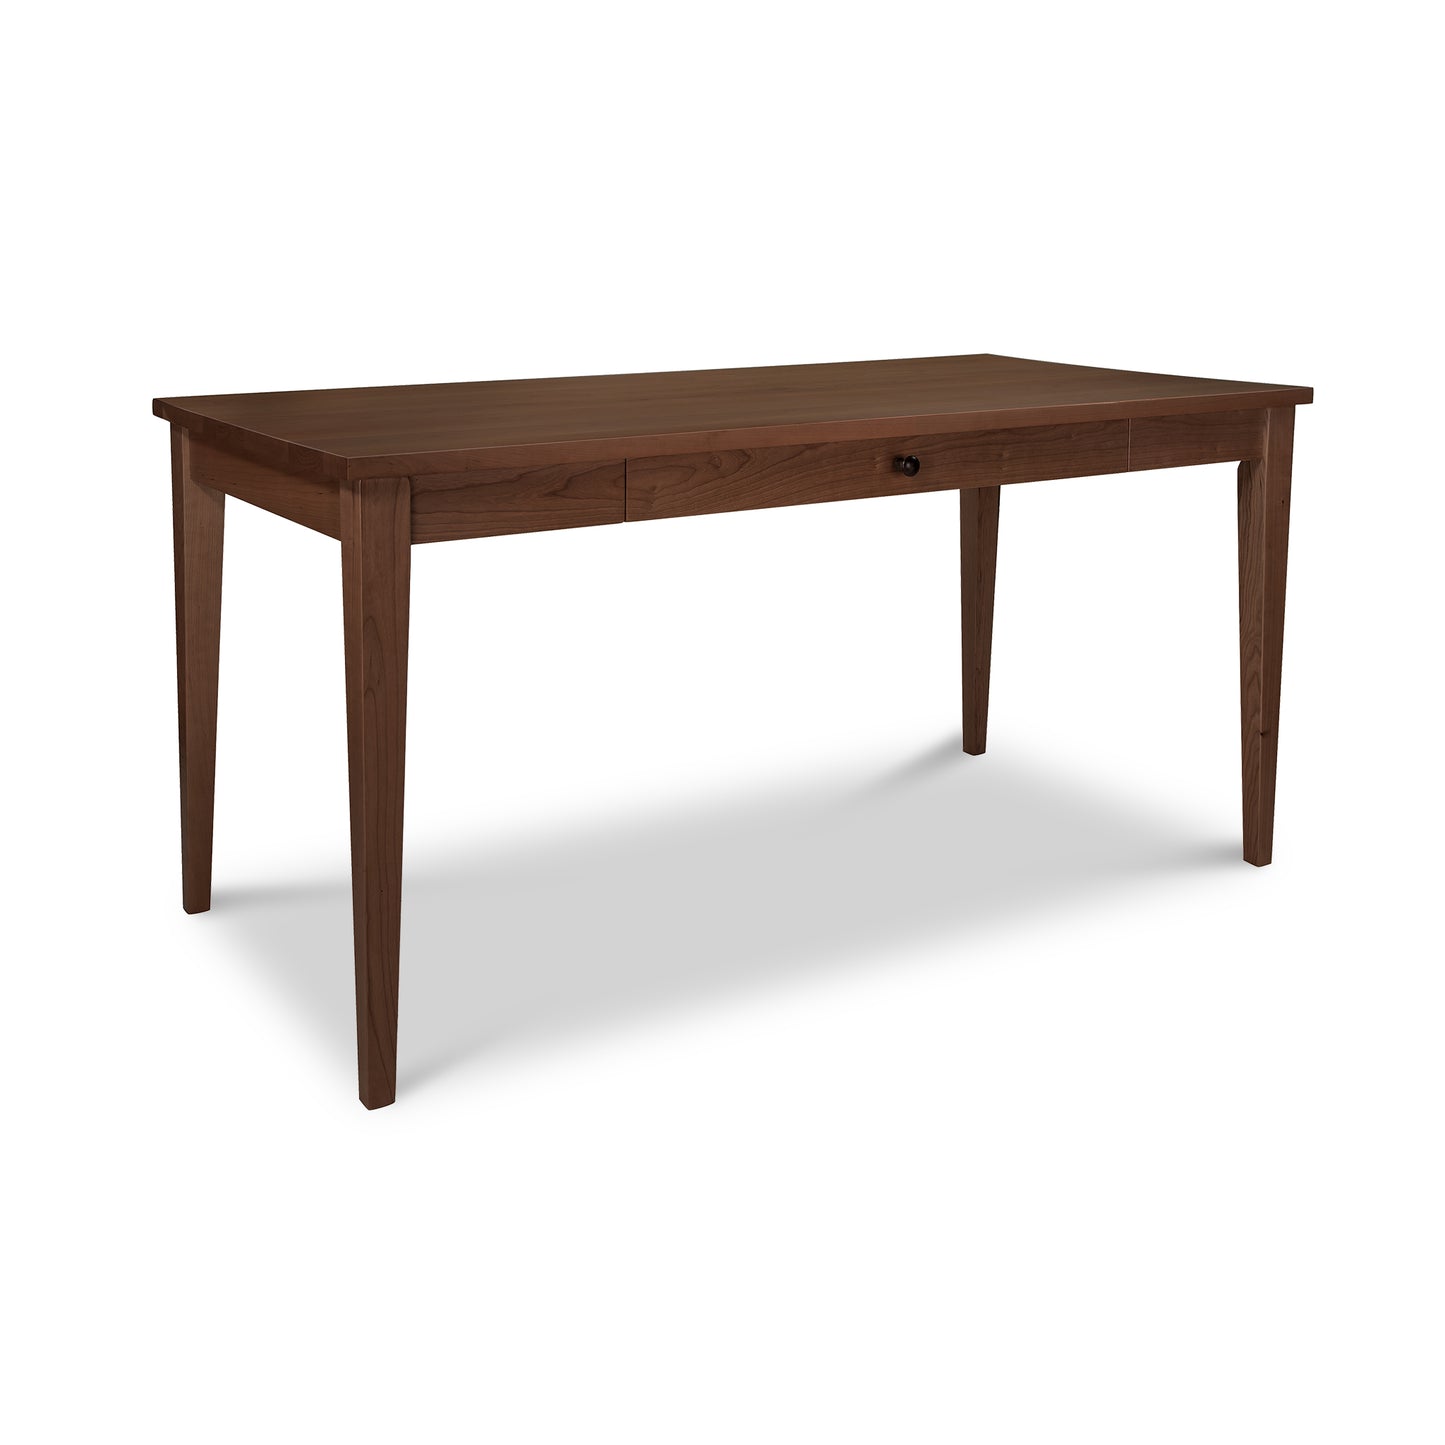 An eco-friendly Classic Shaker writing desk made of solid wood by Lyndon Furniture.